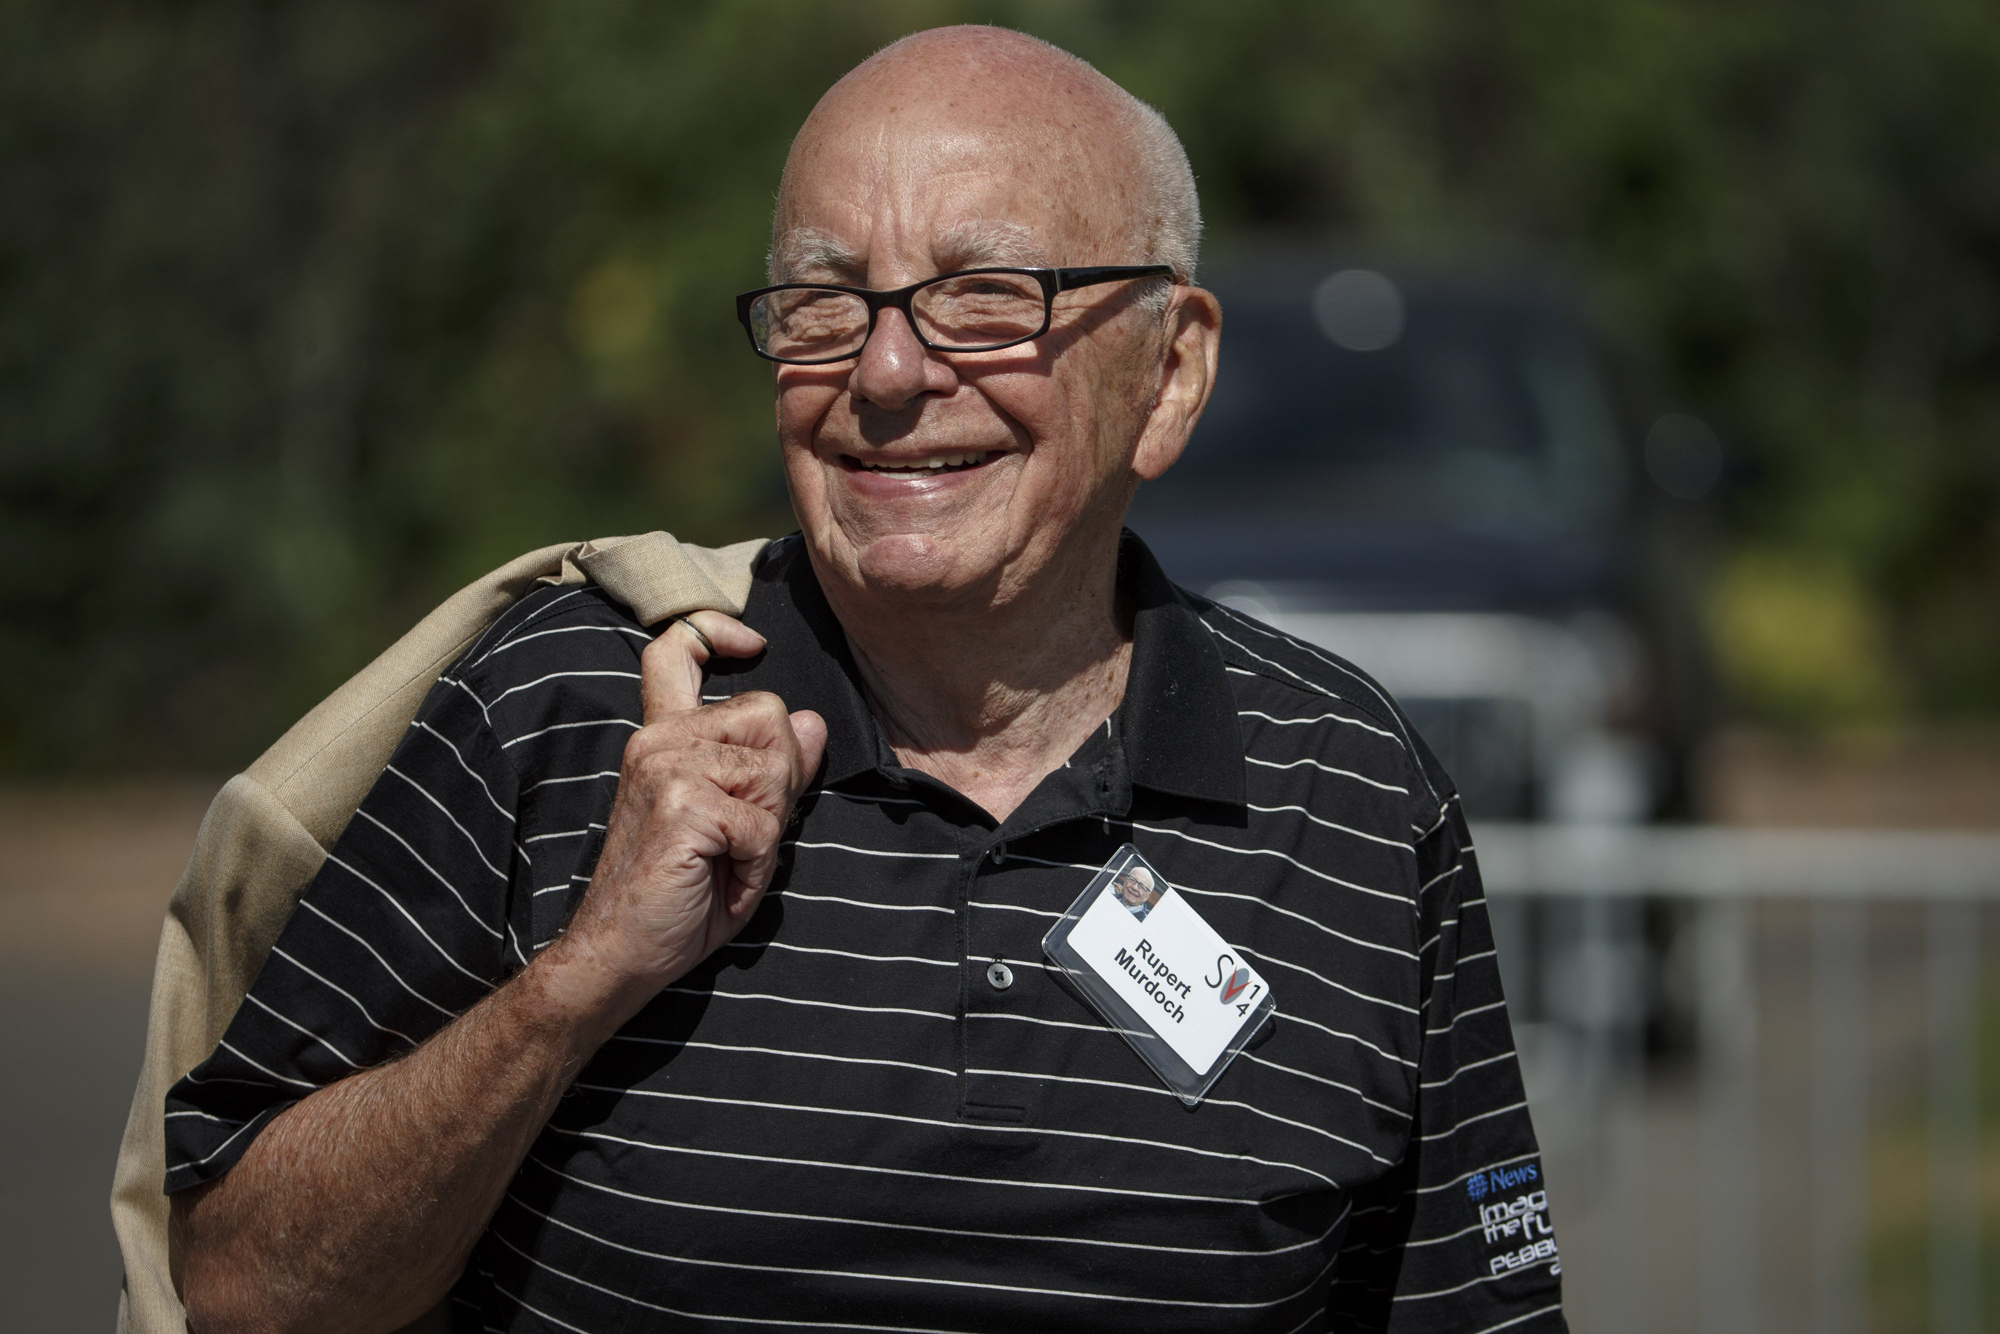 Rupert Murdoch, Executive Chairman of News Corp. and Chairman and CEO of 21st Century Fox, attends the Allen &amp; Co. 32nd annual Media and Technology Conference, in Sun Valley, Idaho, July 10, 2014. (Gary He—Insider Images/Polaris)